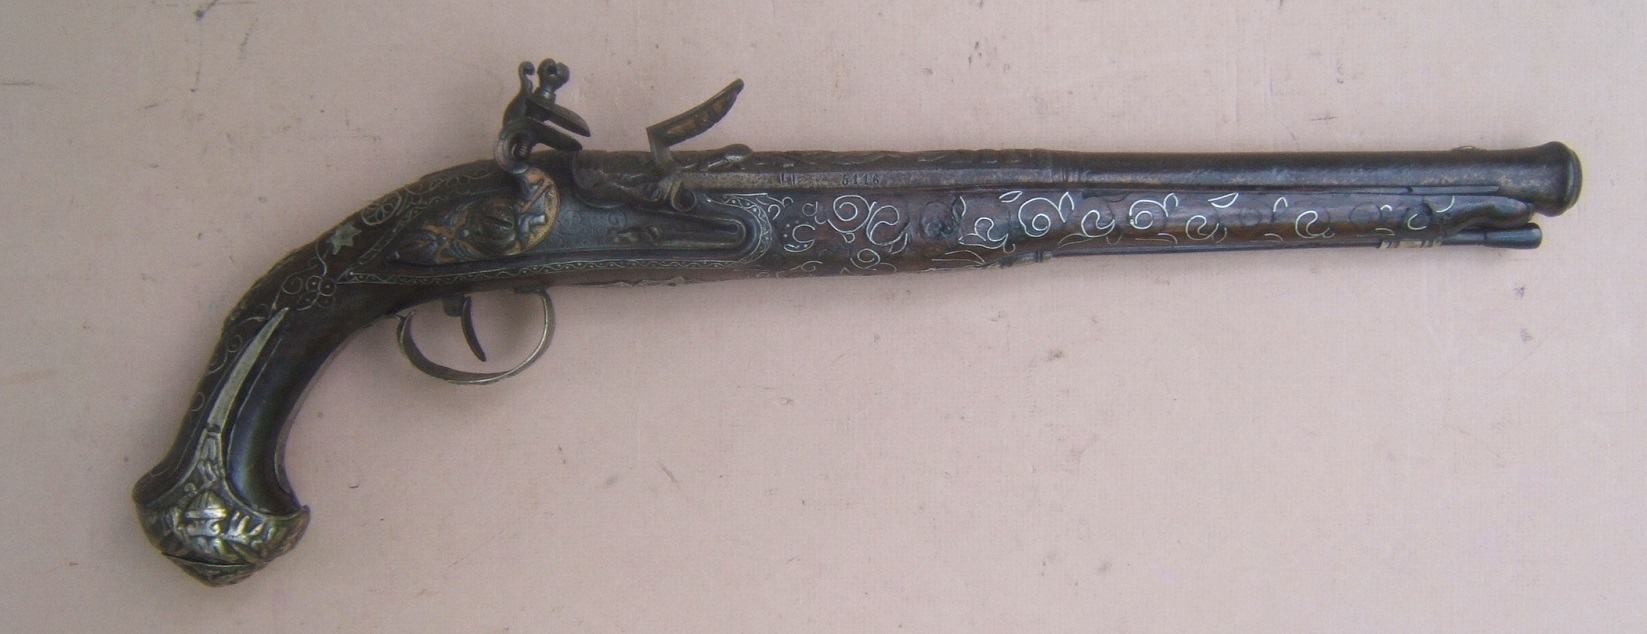 A VERY FINE QUALITY FRENCH SILVER MOUNTED & GOLD DAMASCENED FLINTLOCK HOLSTER PISTOL, by “PEYRTE DUMAREST” (FOR EASTERN/TURKISH MARKET, ca. 1780 view 1